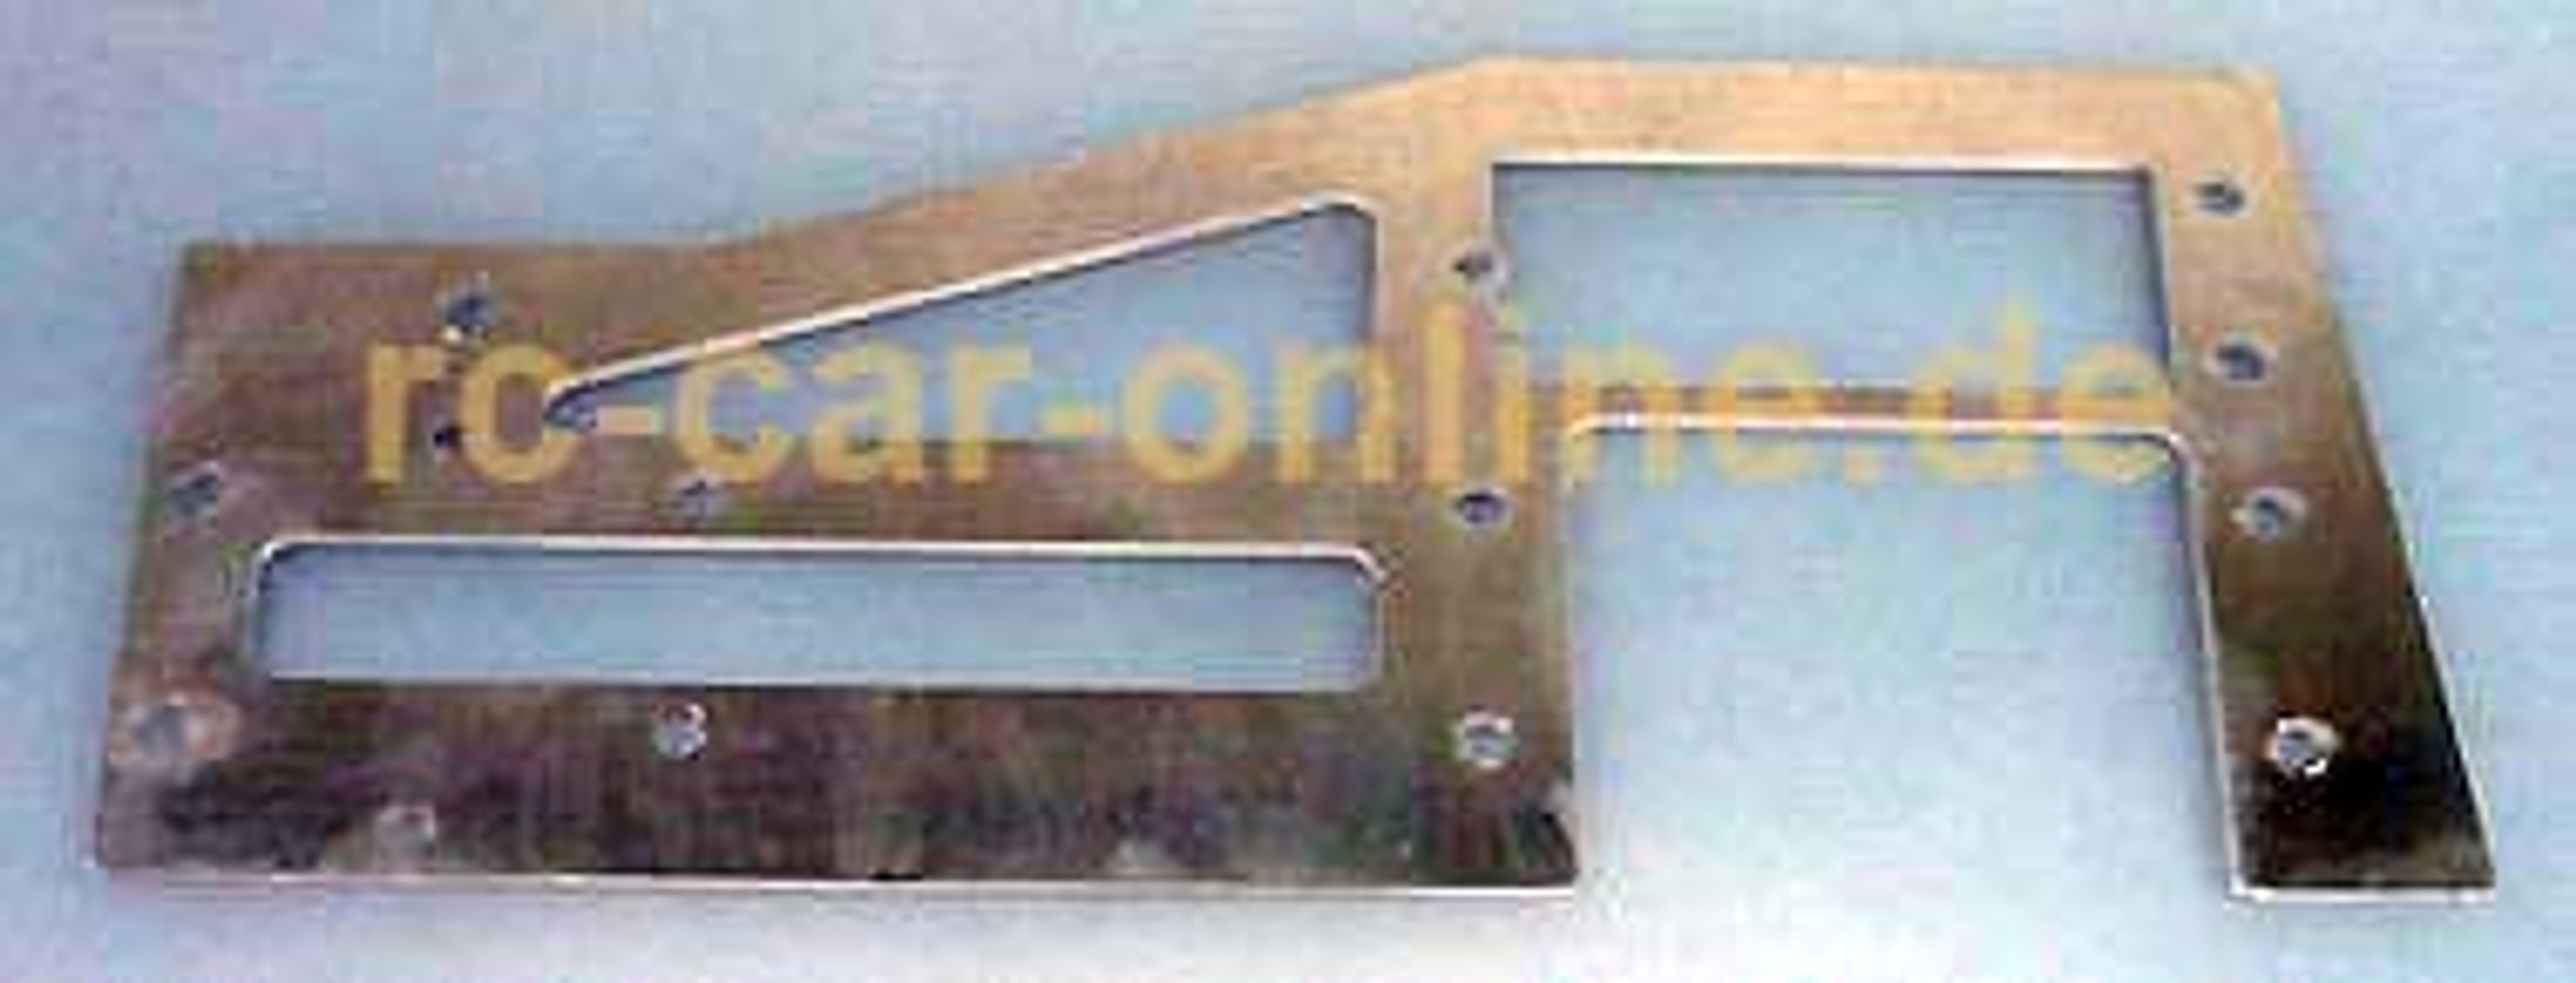 10018 FG Alloy side plate right - 1pce.